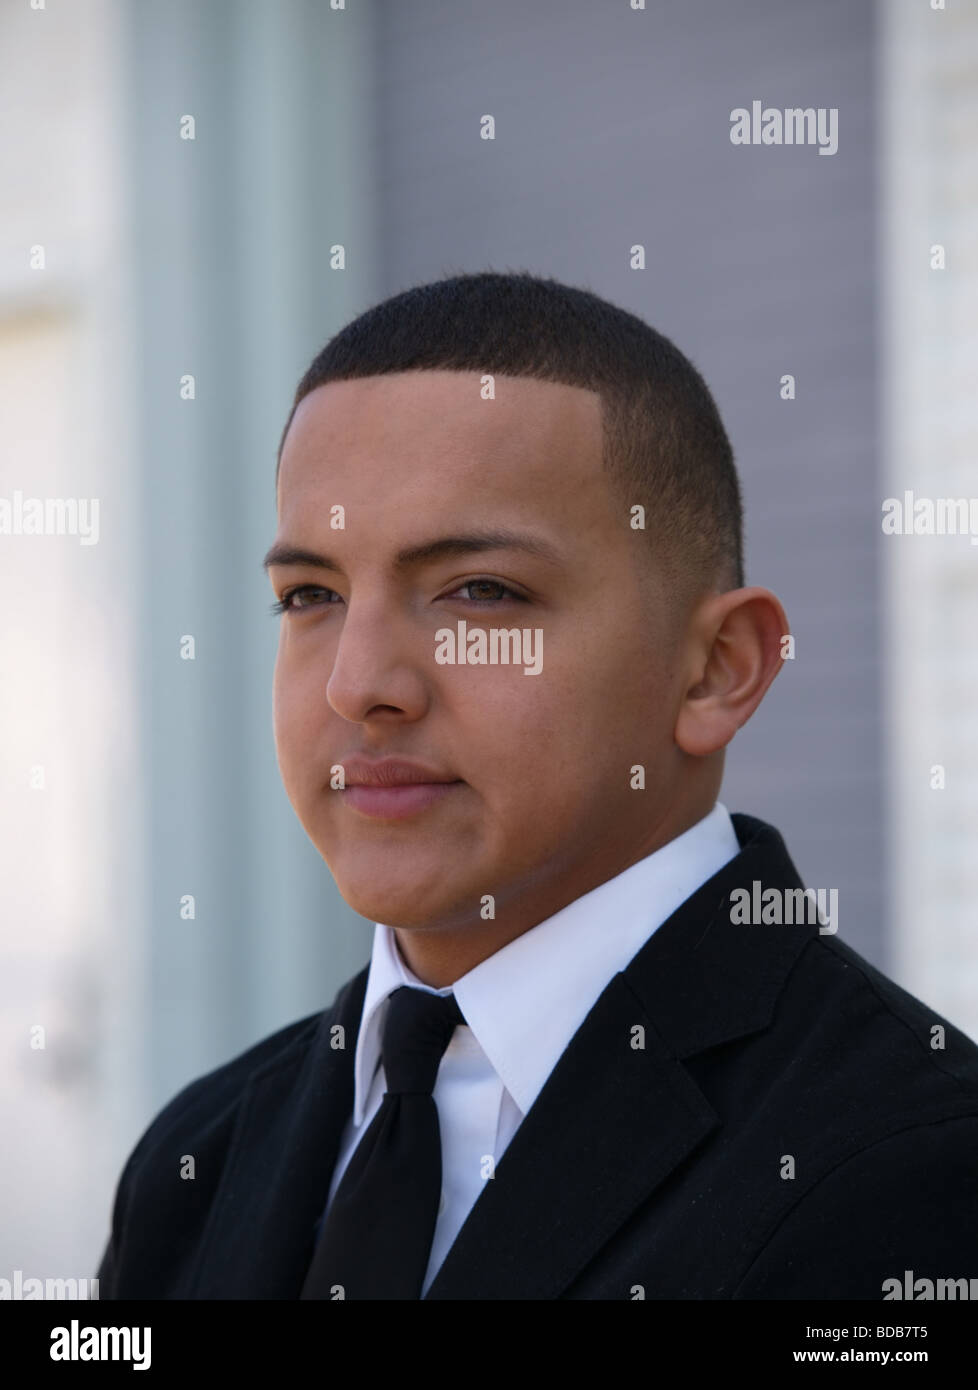 Hispanic young man with short hair and in a black business suit. Stock Photo